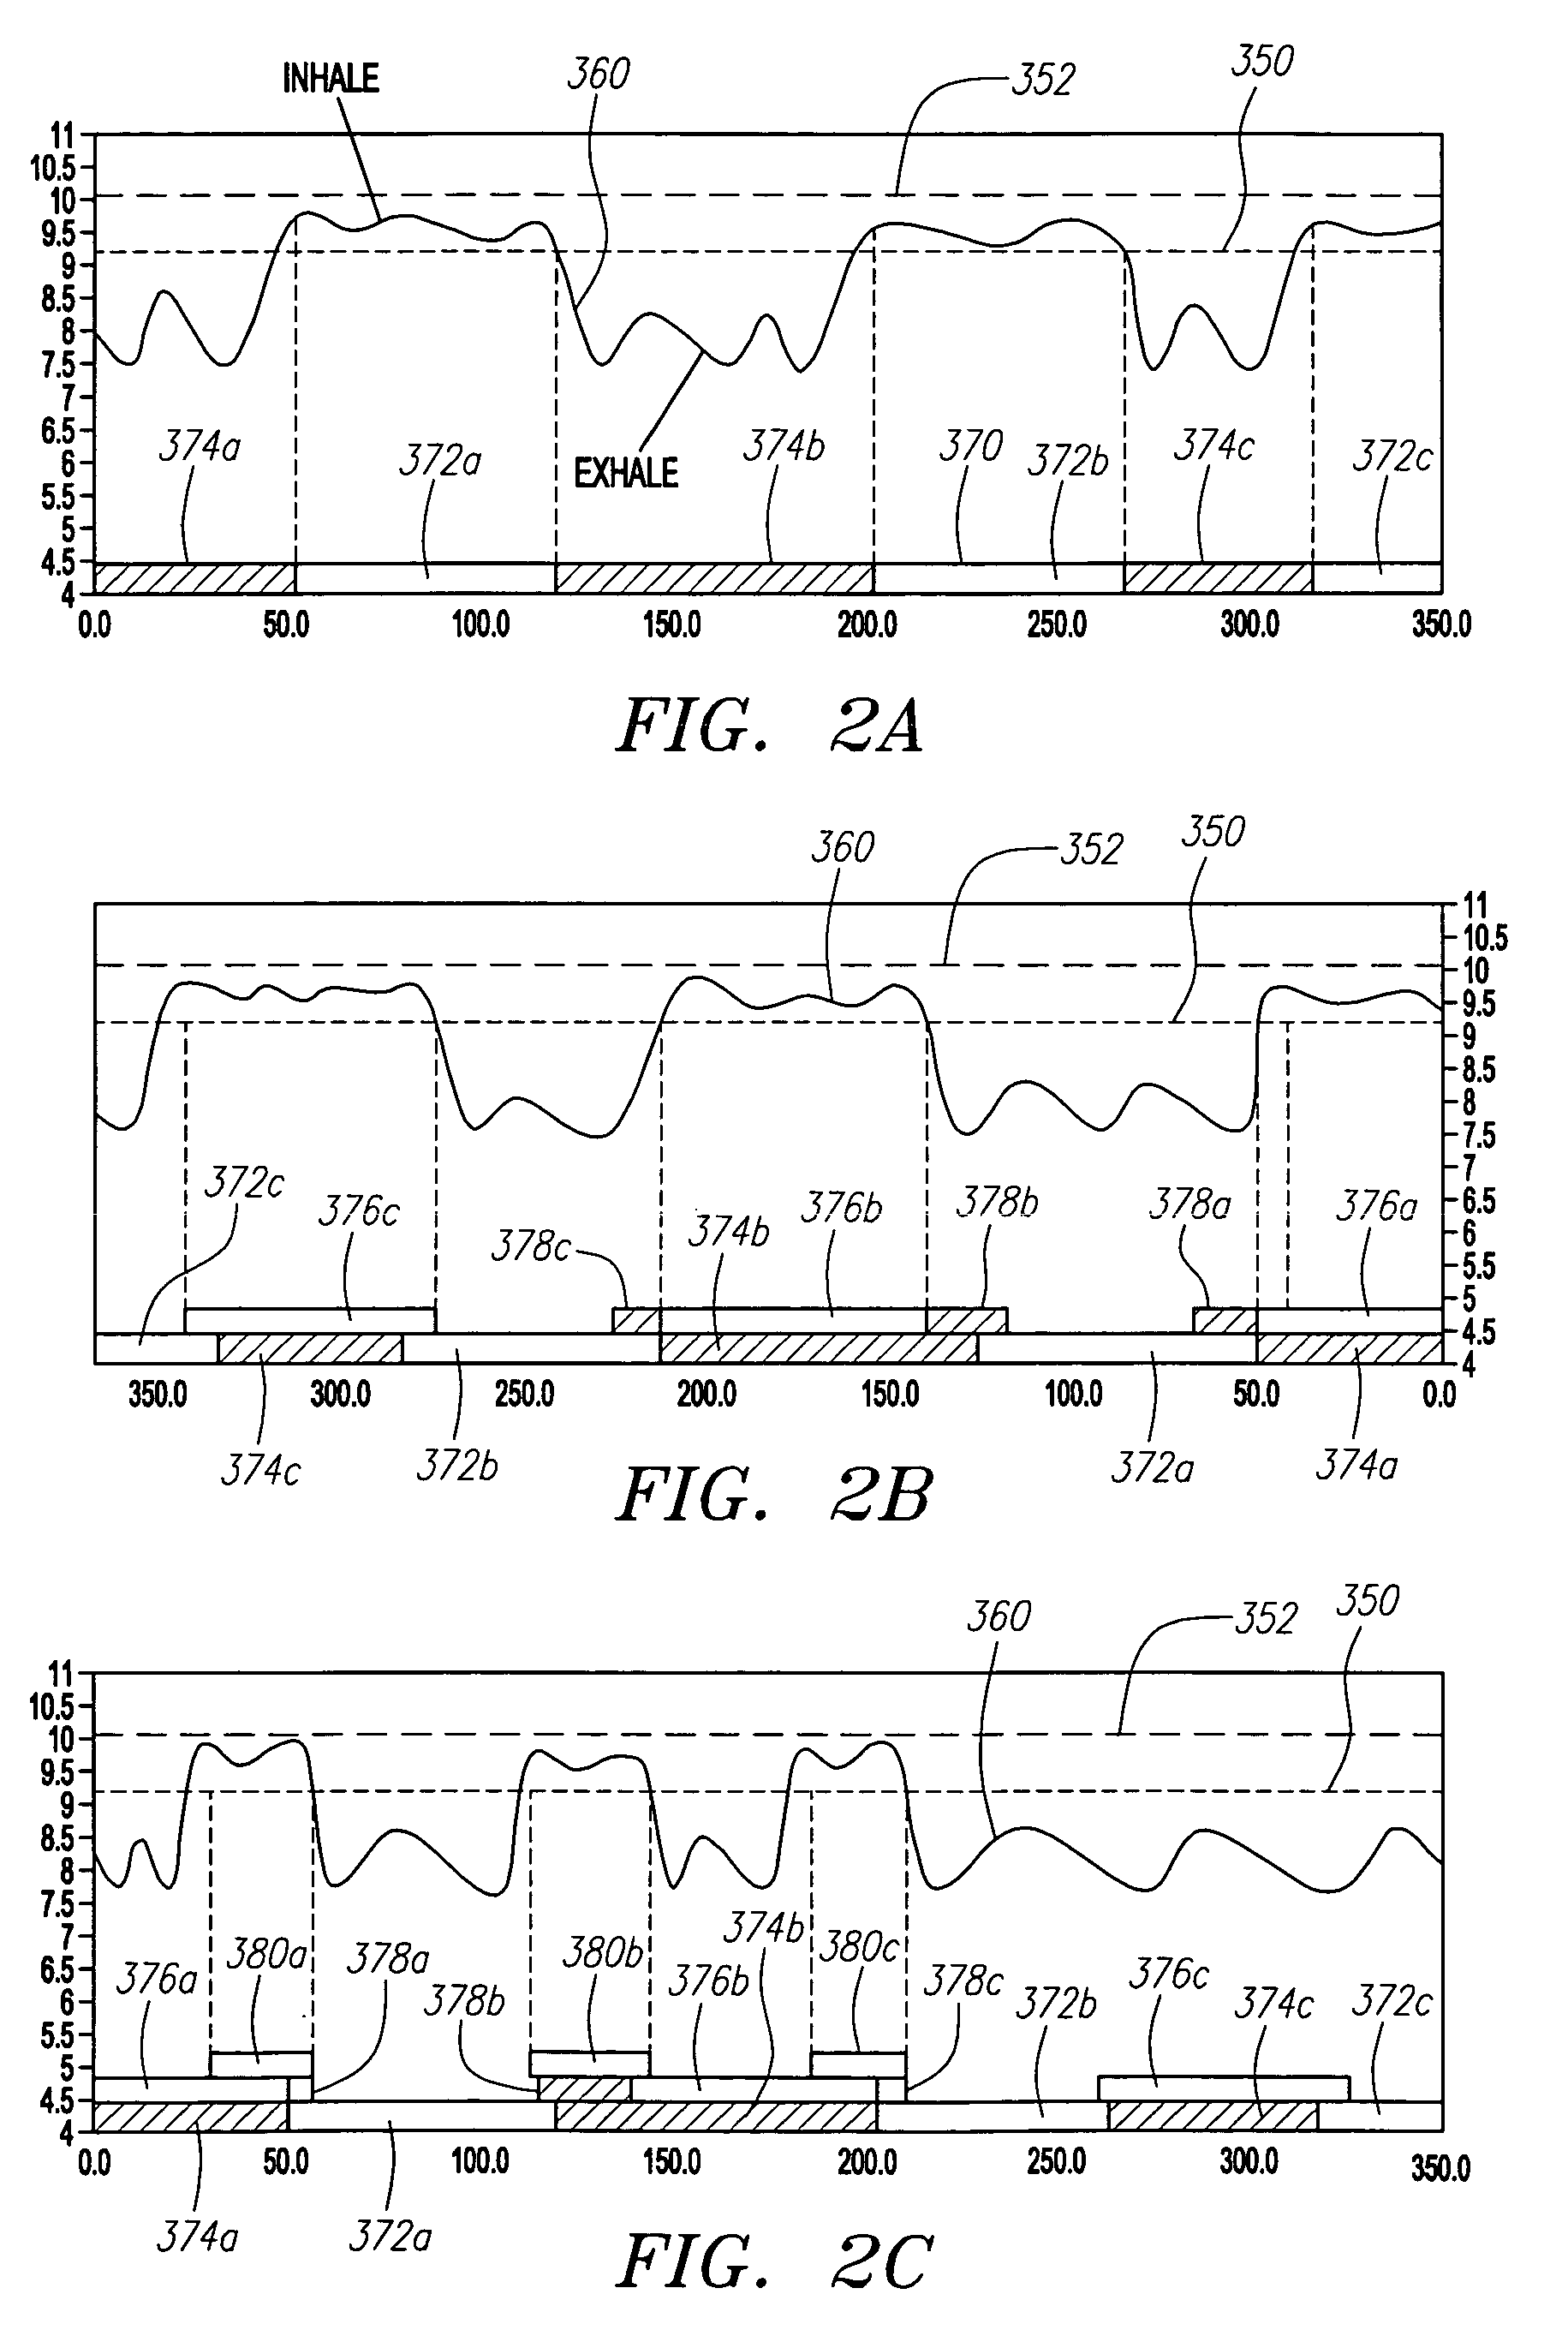 Patient visual instruction techniques for synchronizing breathing with a medical procedure